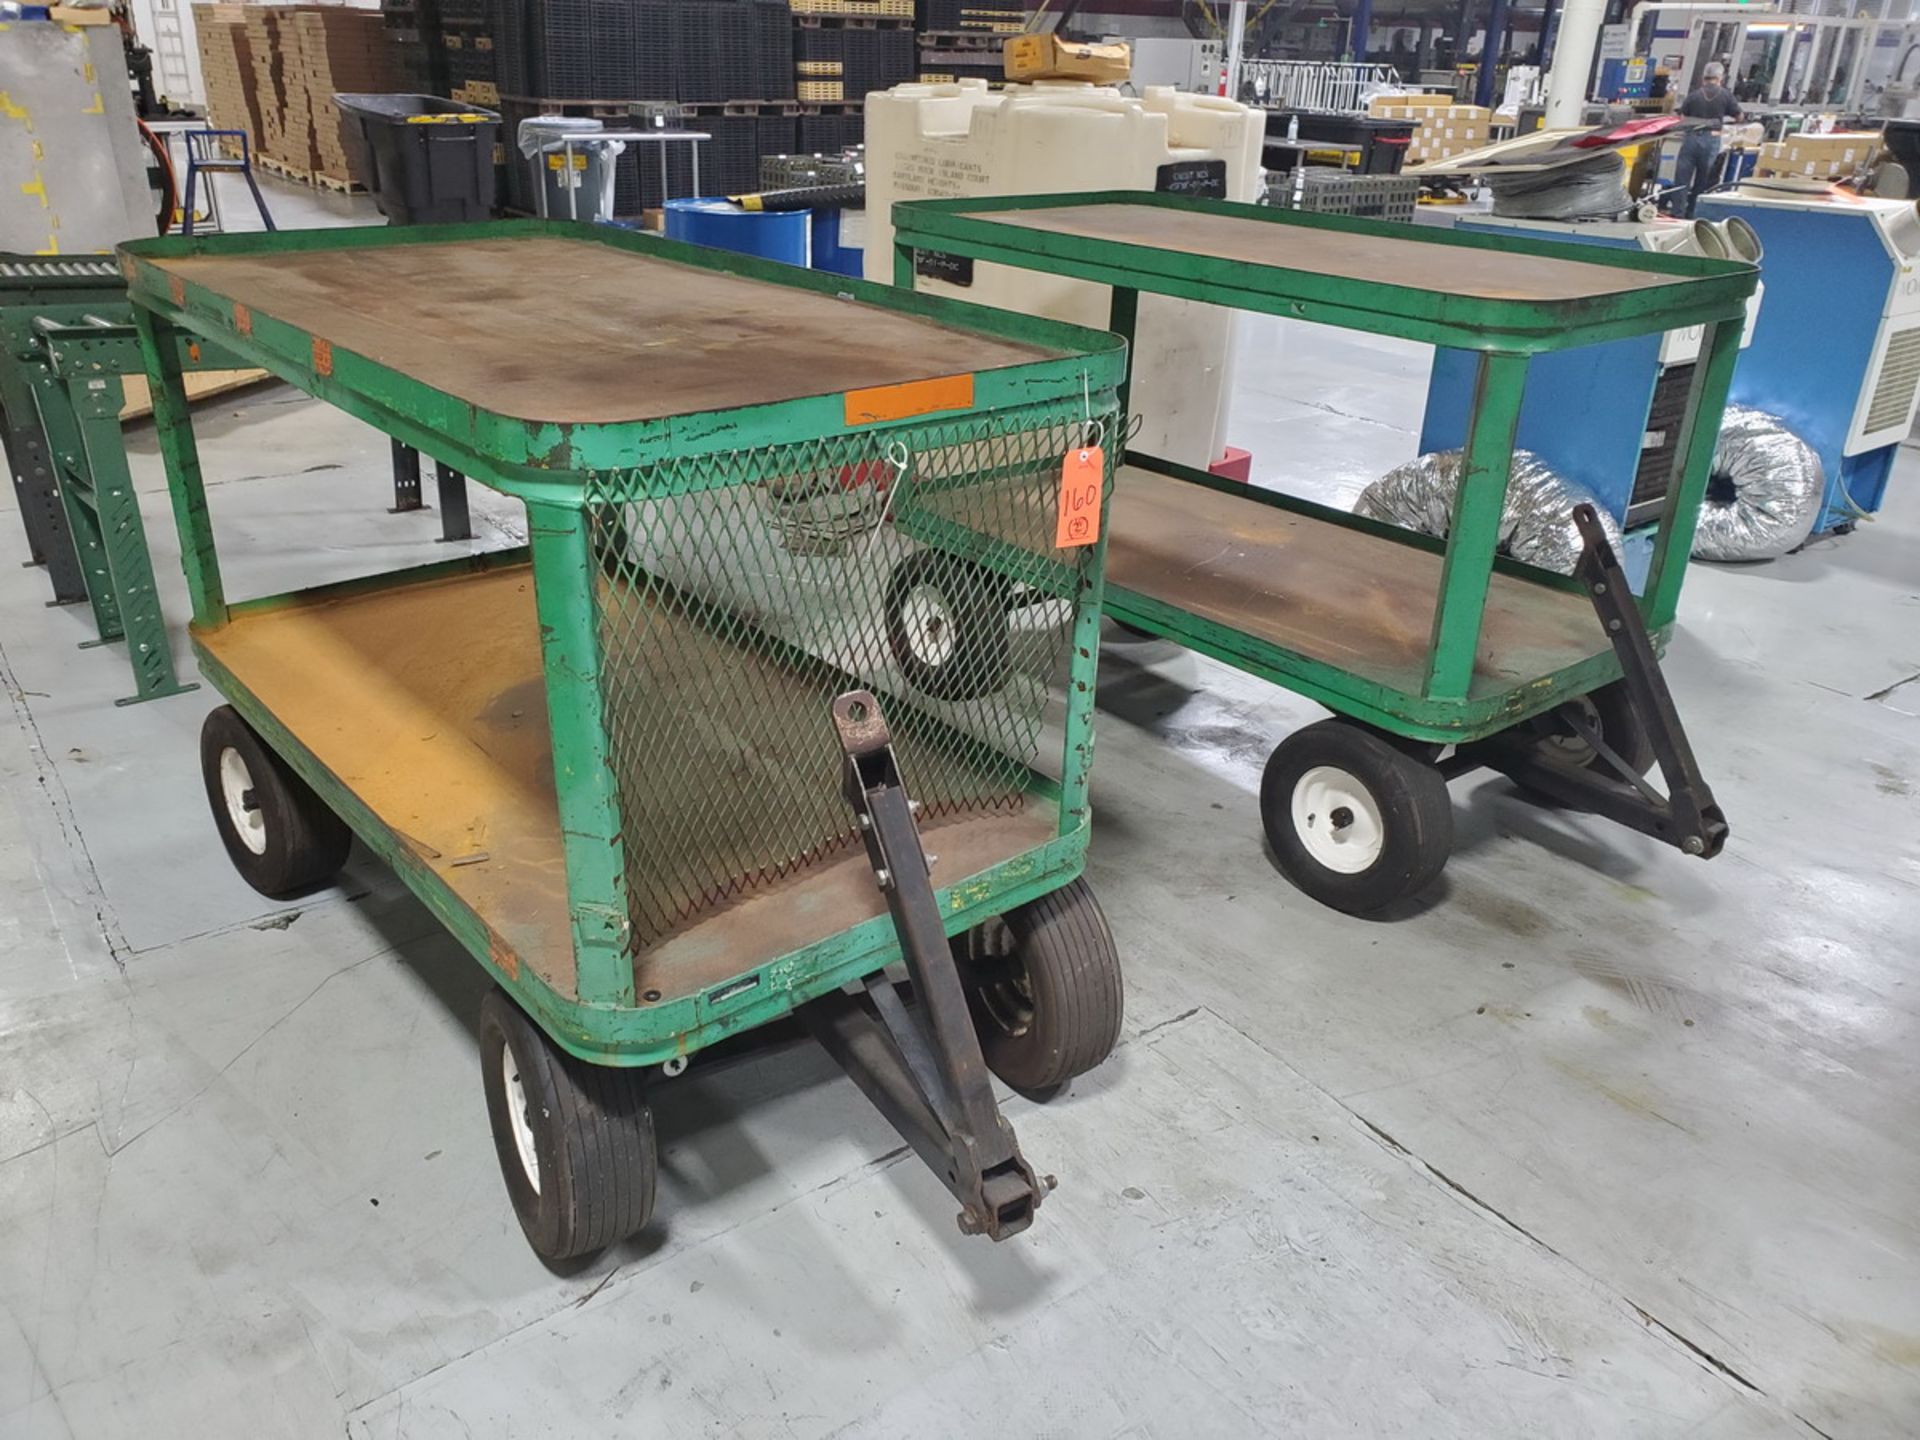 Lot - (2) 2-Tier Portable Steel Carts with Rubber Wheels; 6 ft. x 3 ft. x 4 ft. h - Image 2 of 5